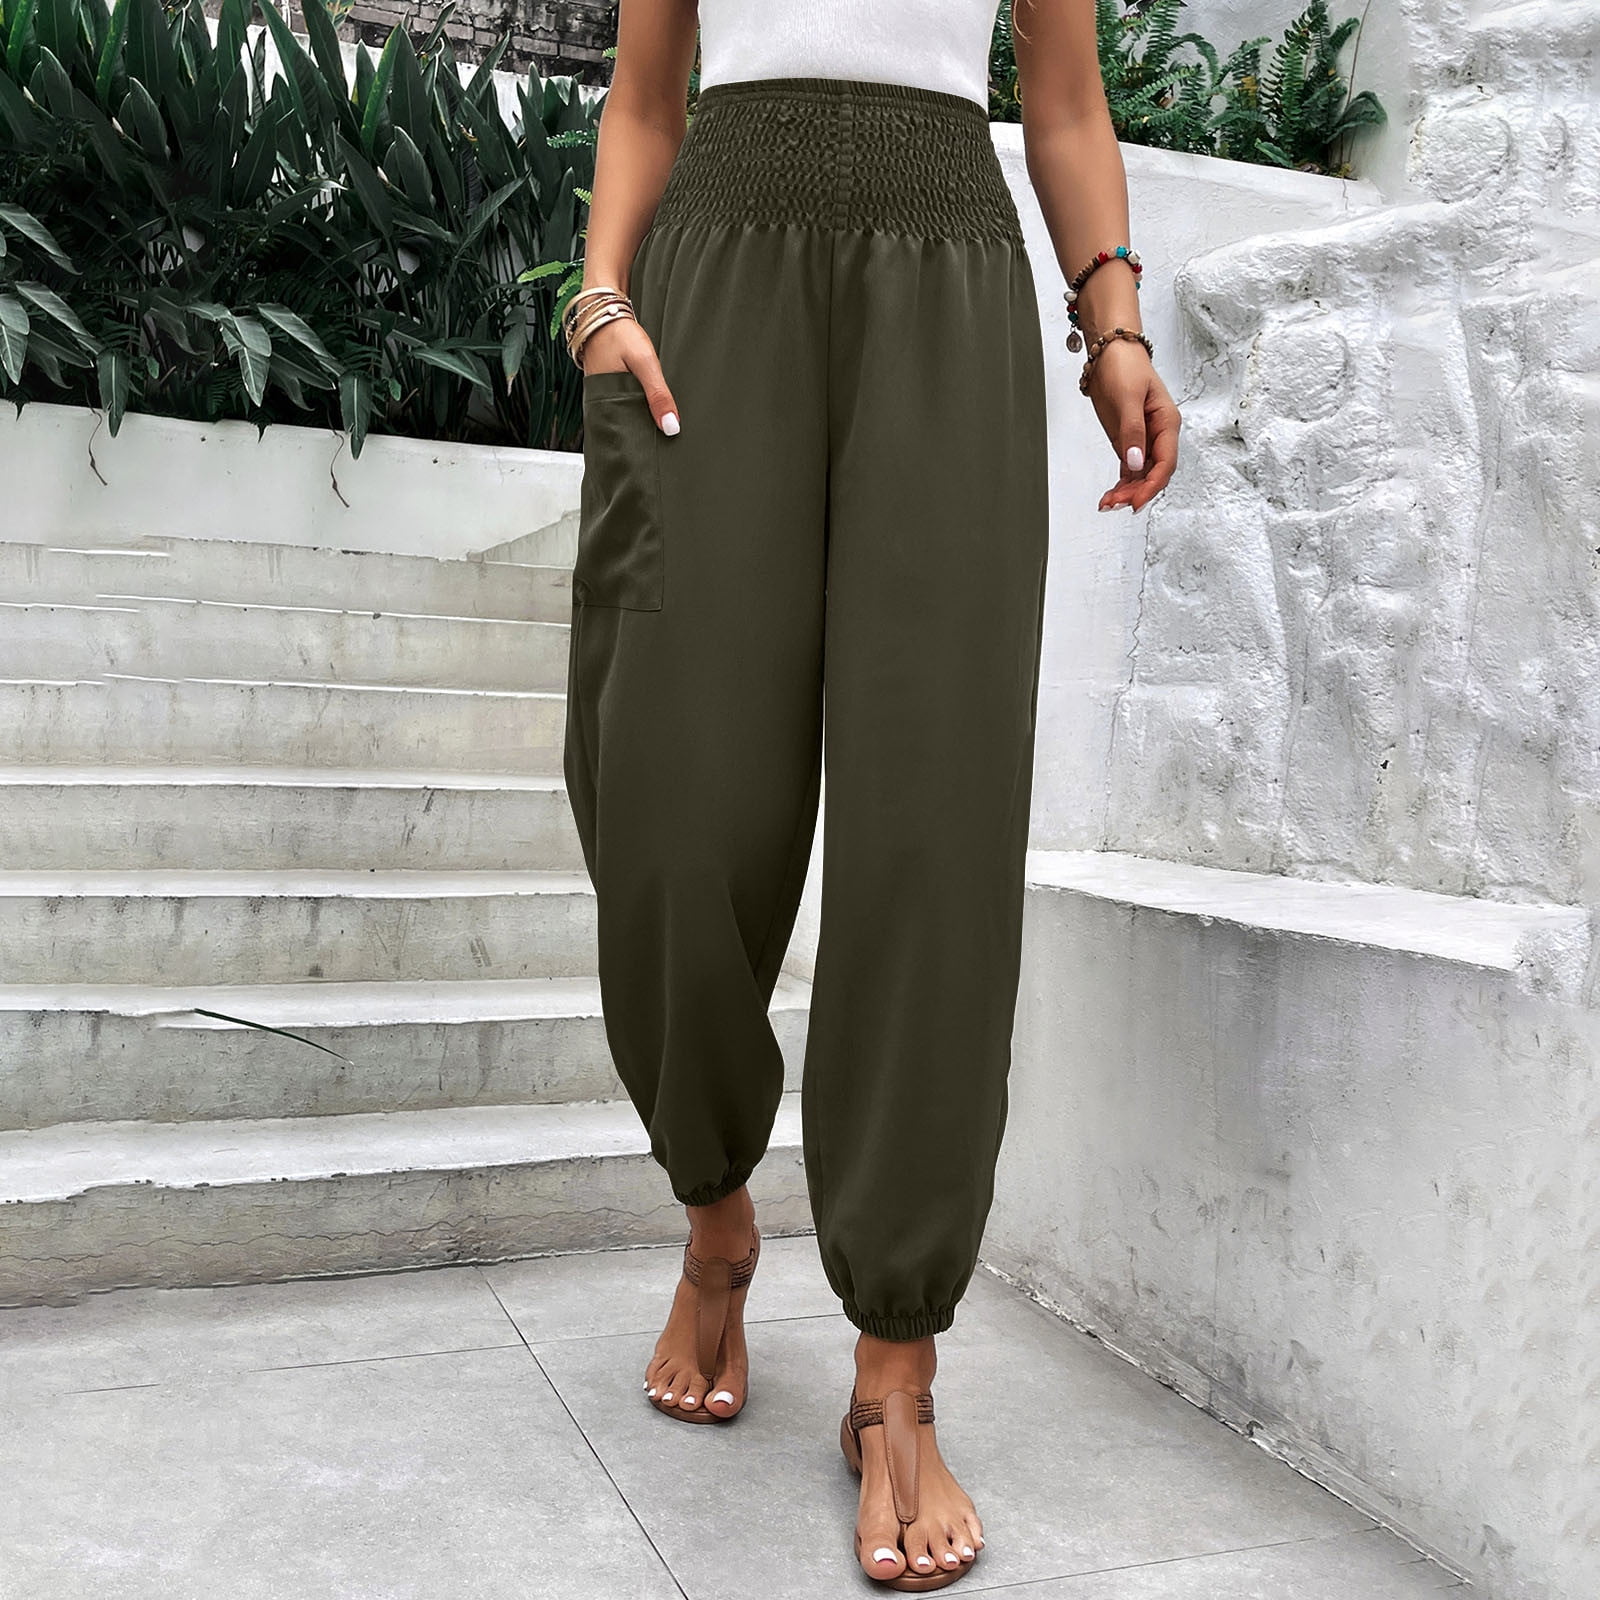 Jsezml Women's Smocked High Waisted Pants Plus Size Cinch Bottom Tapered  Pants Casual Pants Trousers for Summer Fashion 